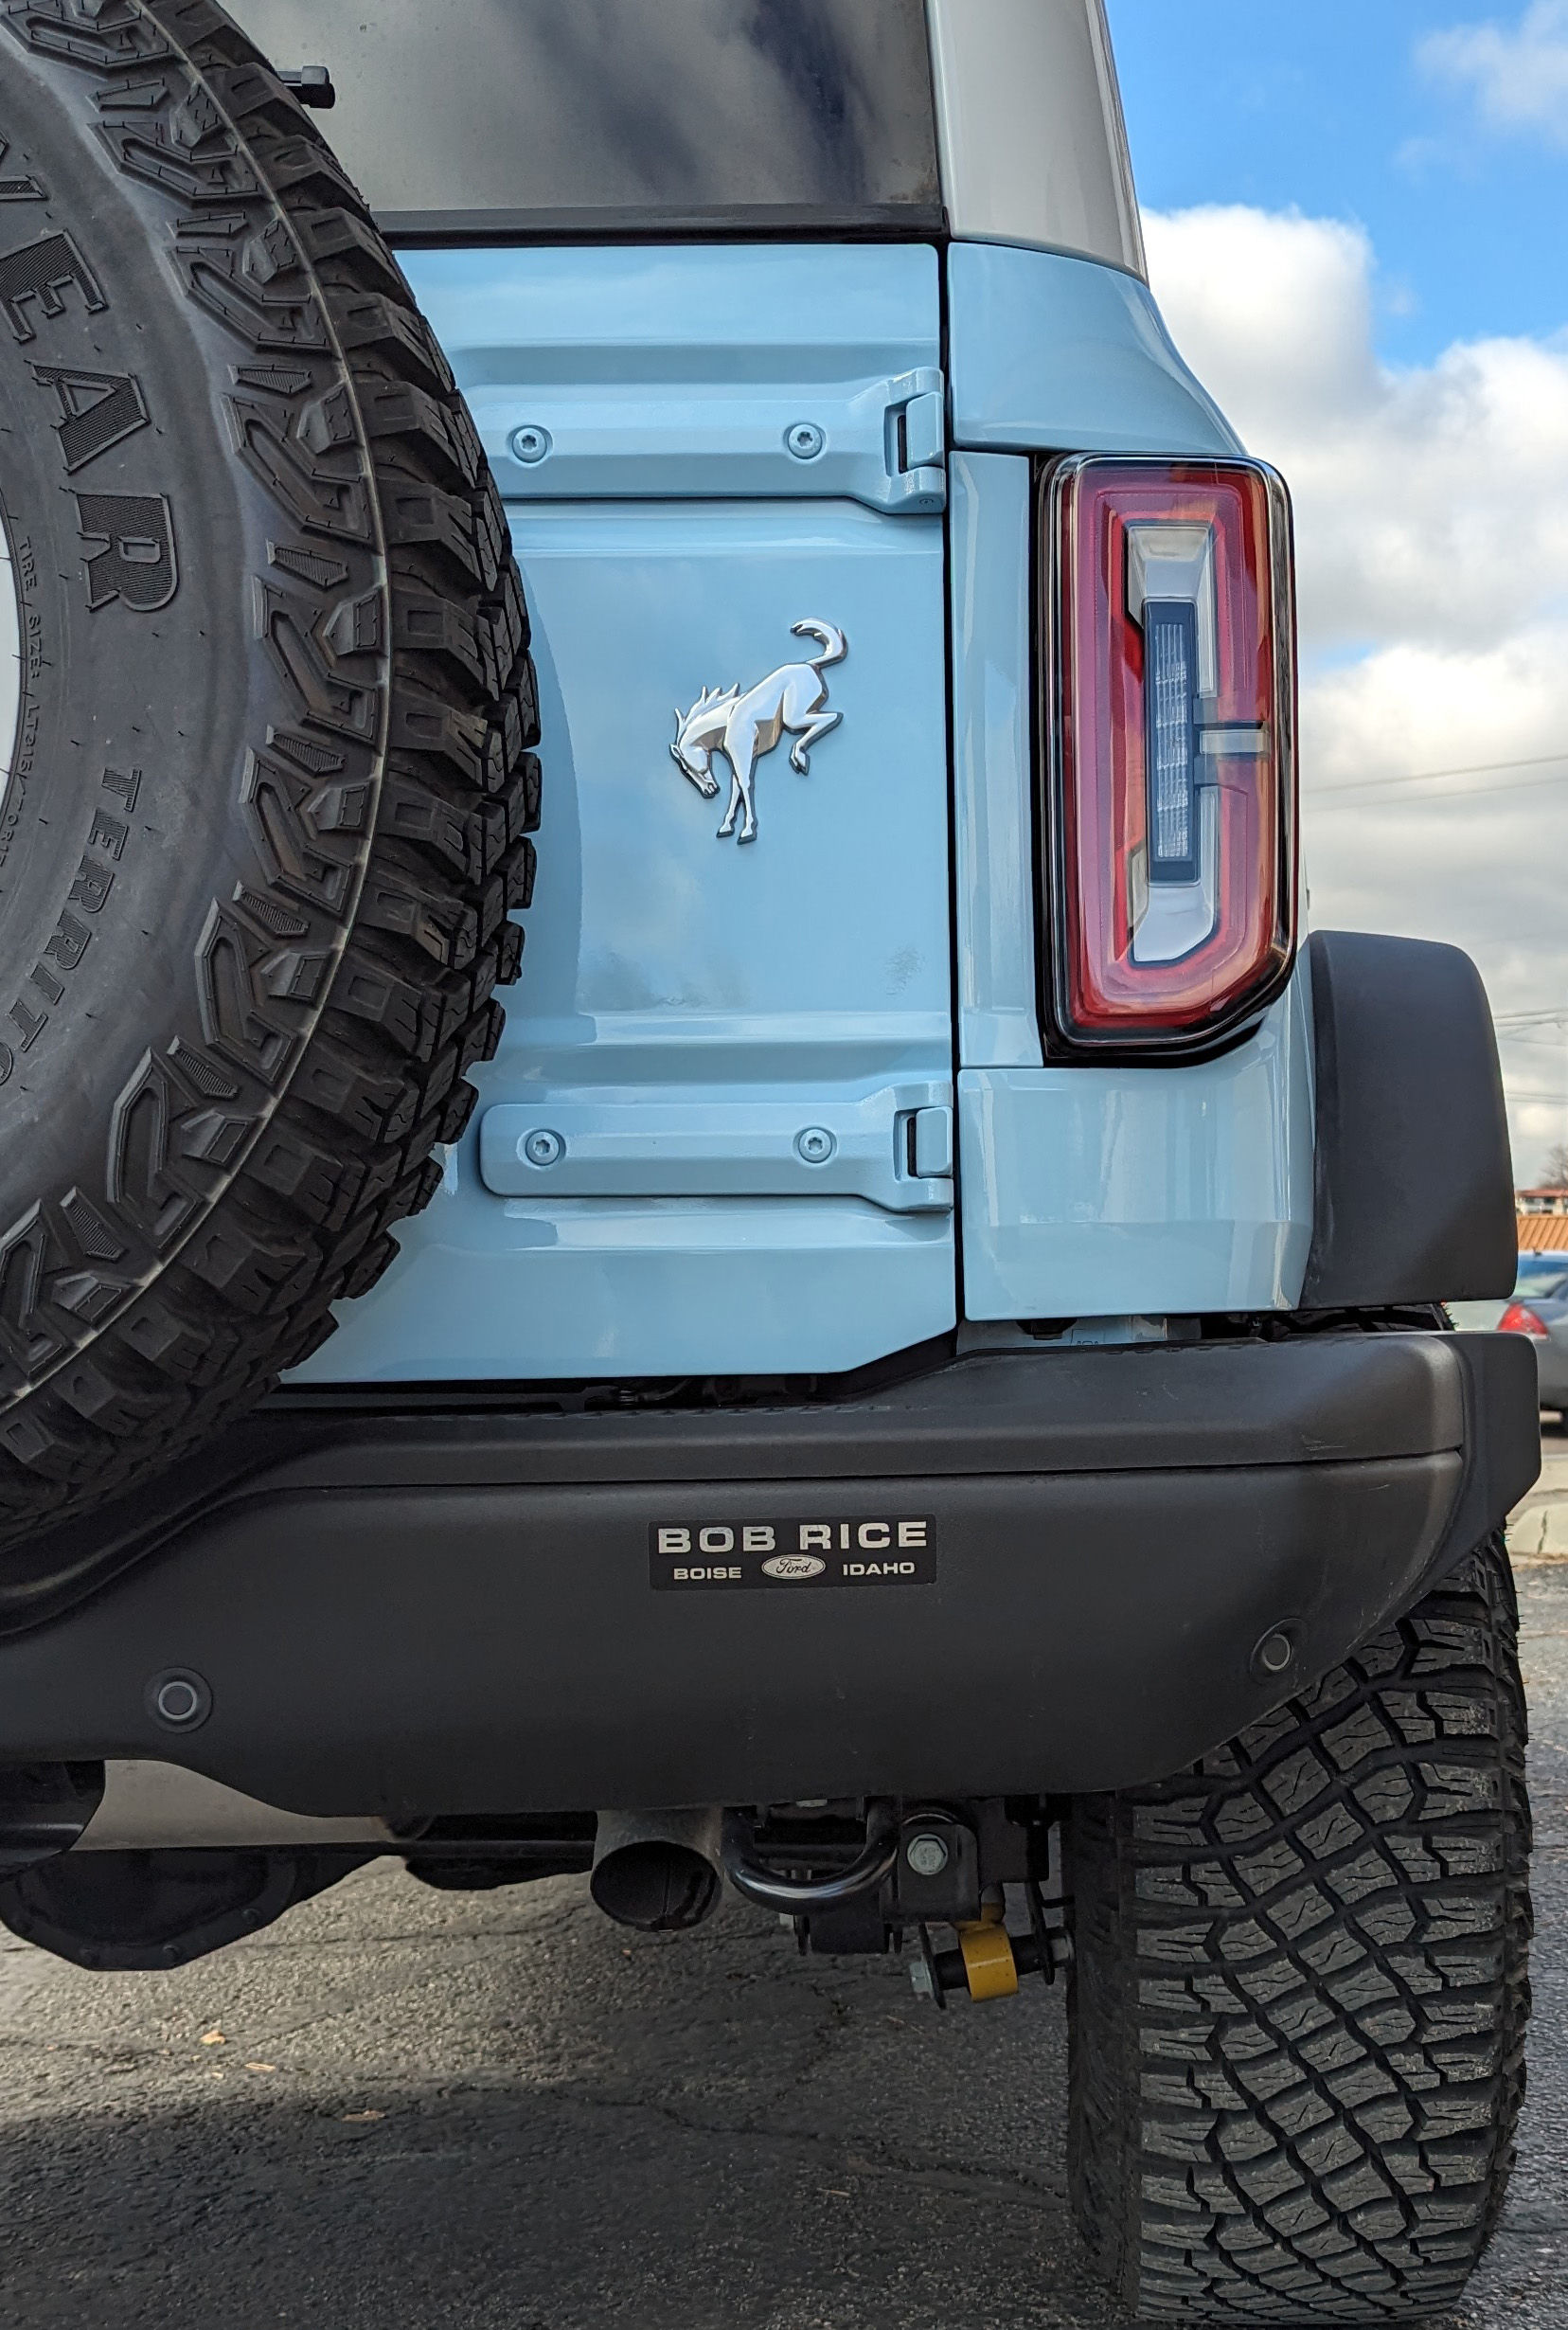 Ford Bronco Put any cool / unique vinyl decals on your Bronco?  Let's see them! Bob Rice easter egg close u